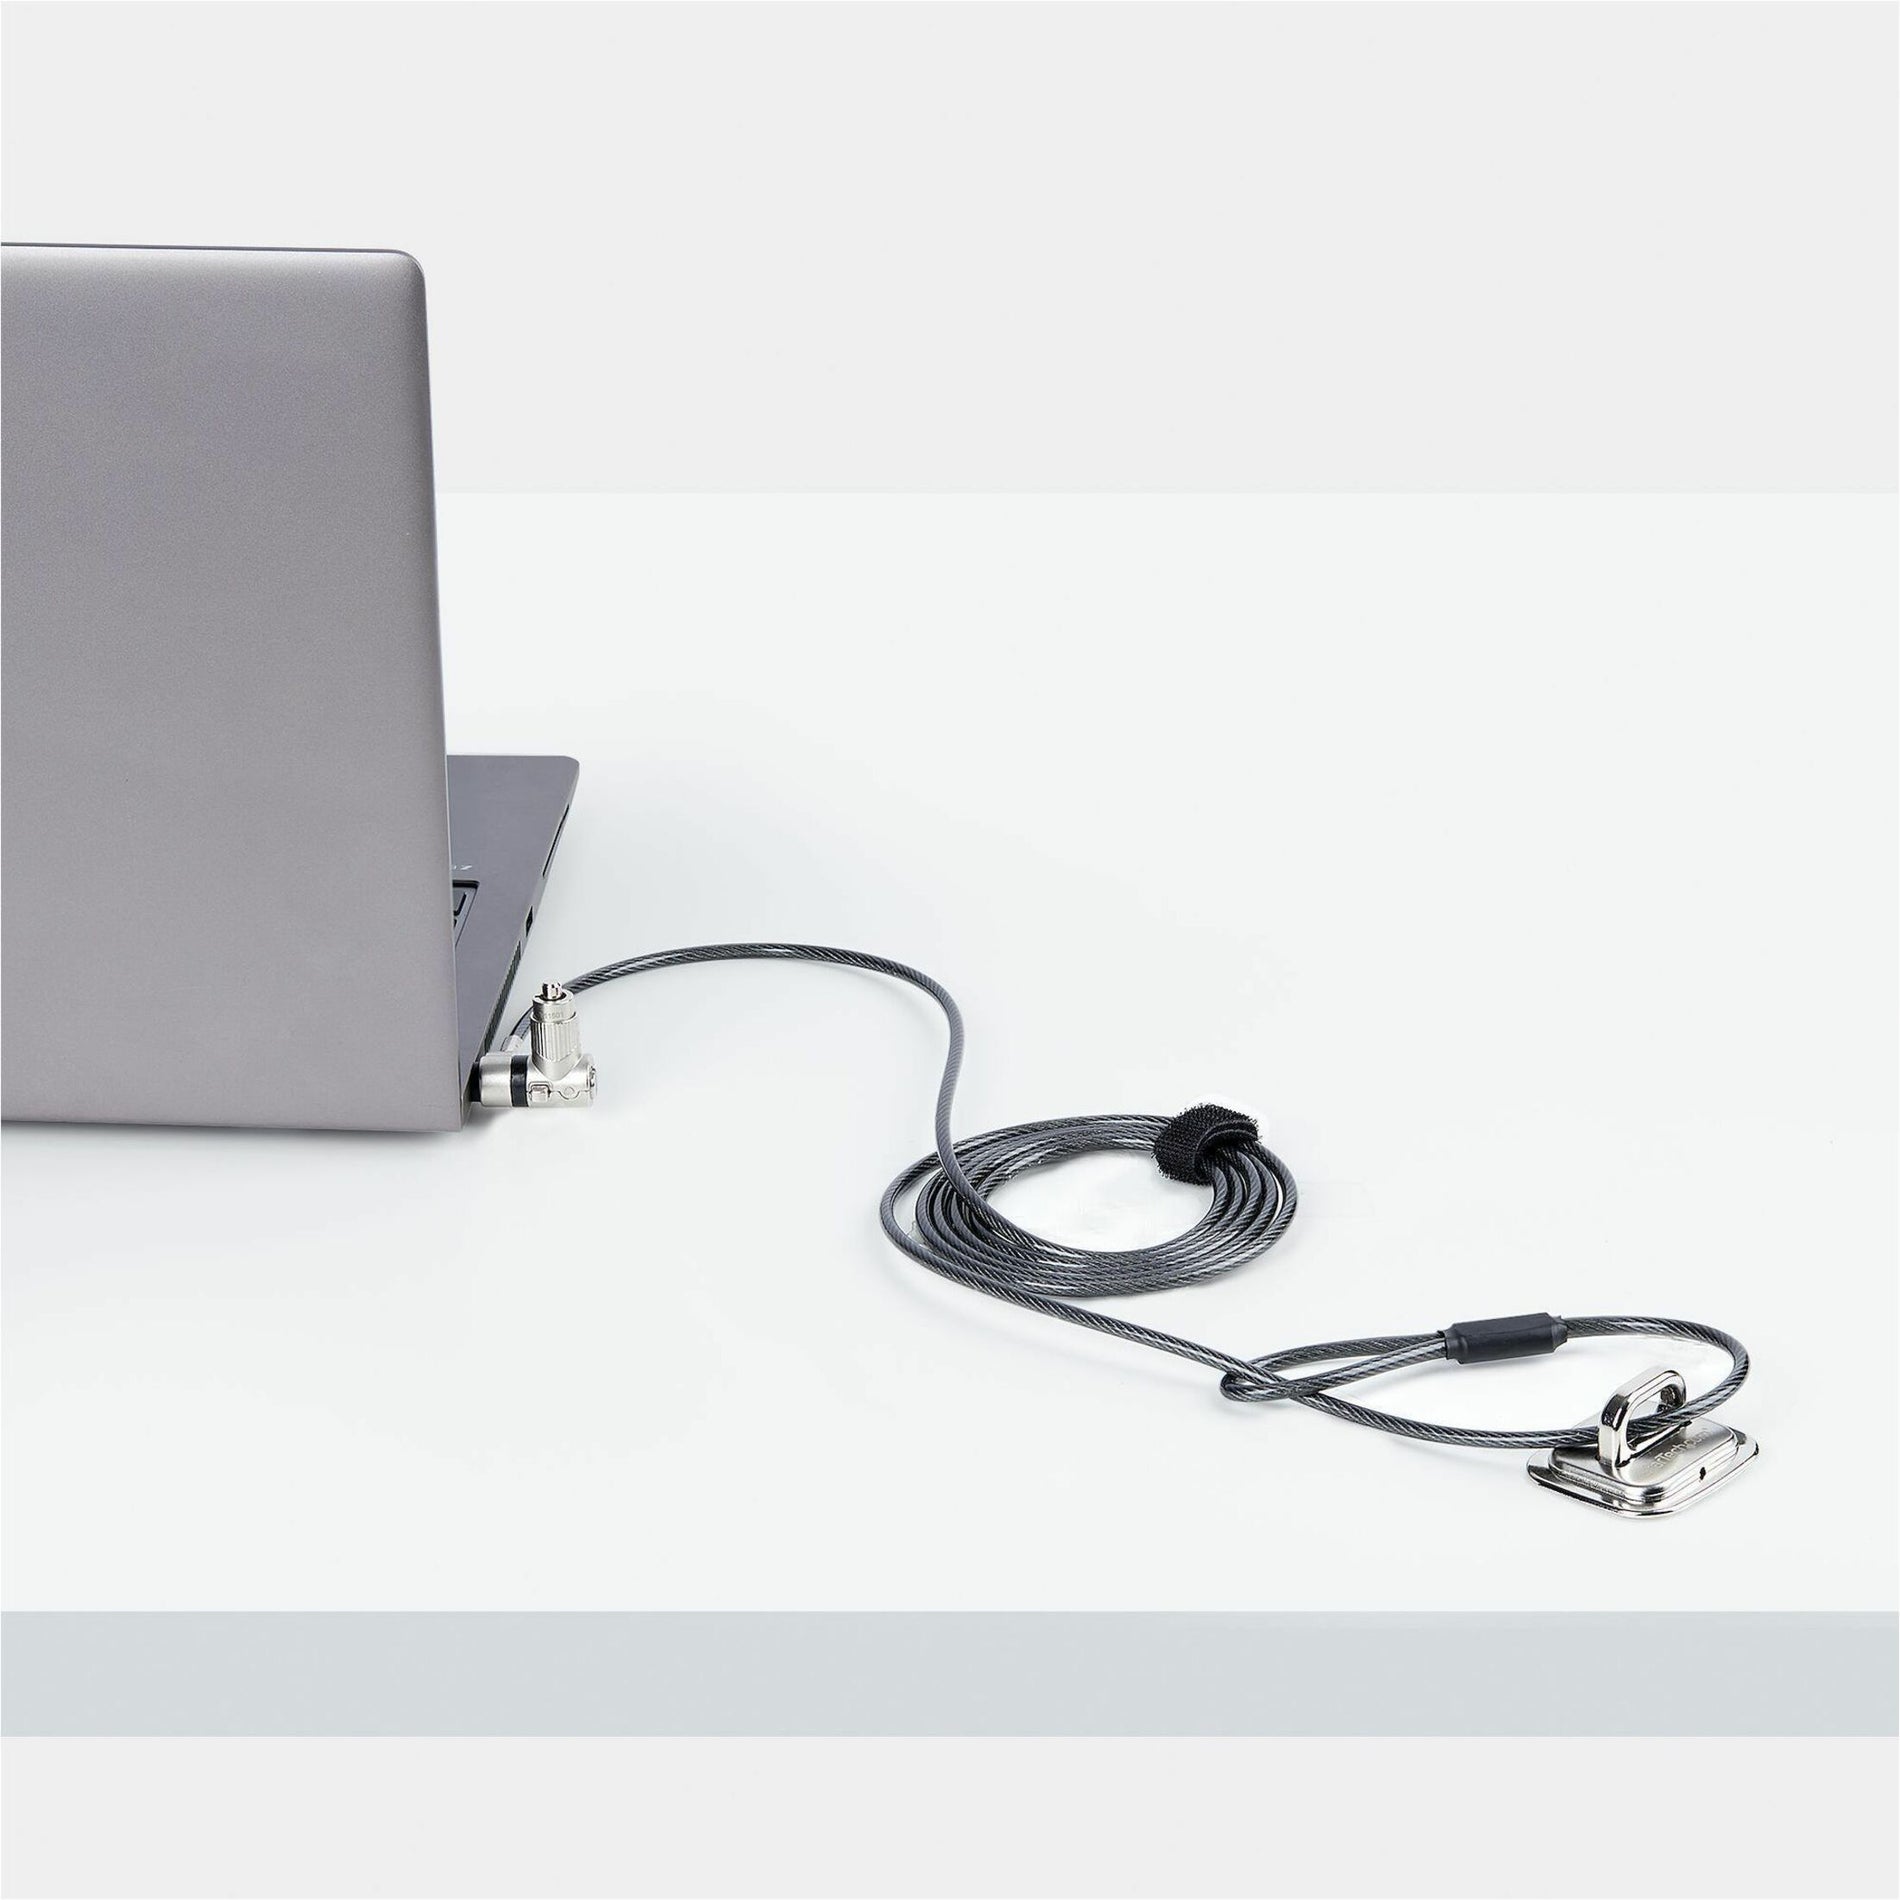 StarTech.com UNIVK-LAPTOP-LOCK Laptop Security Lock, Cable Lock for Notebook, Docking Station, Monitor